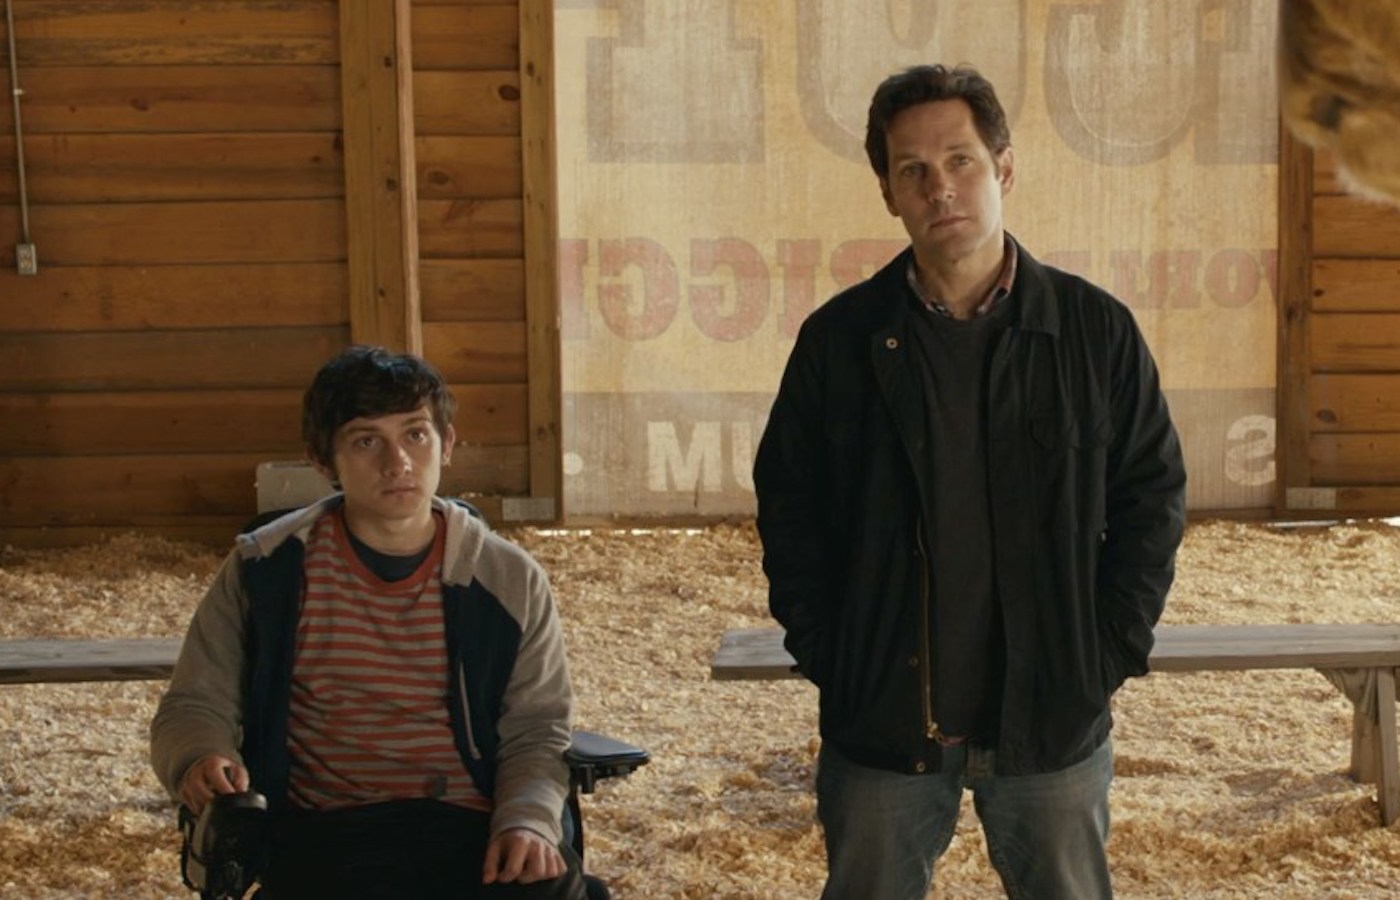 The Fundamentals of Caring Netflix Movie 2016